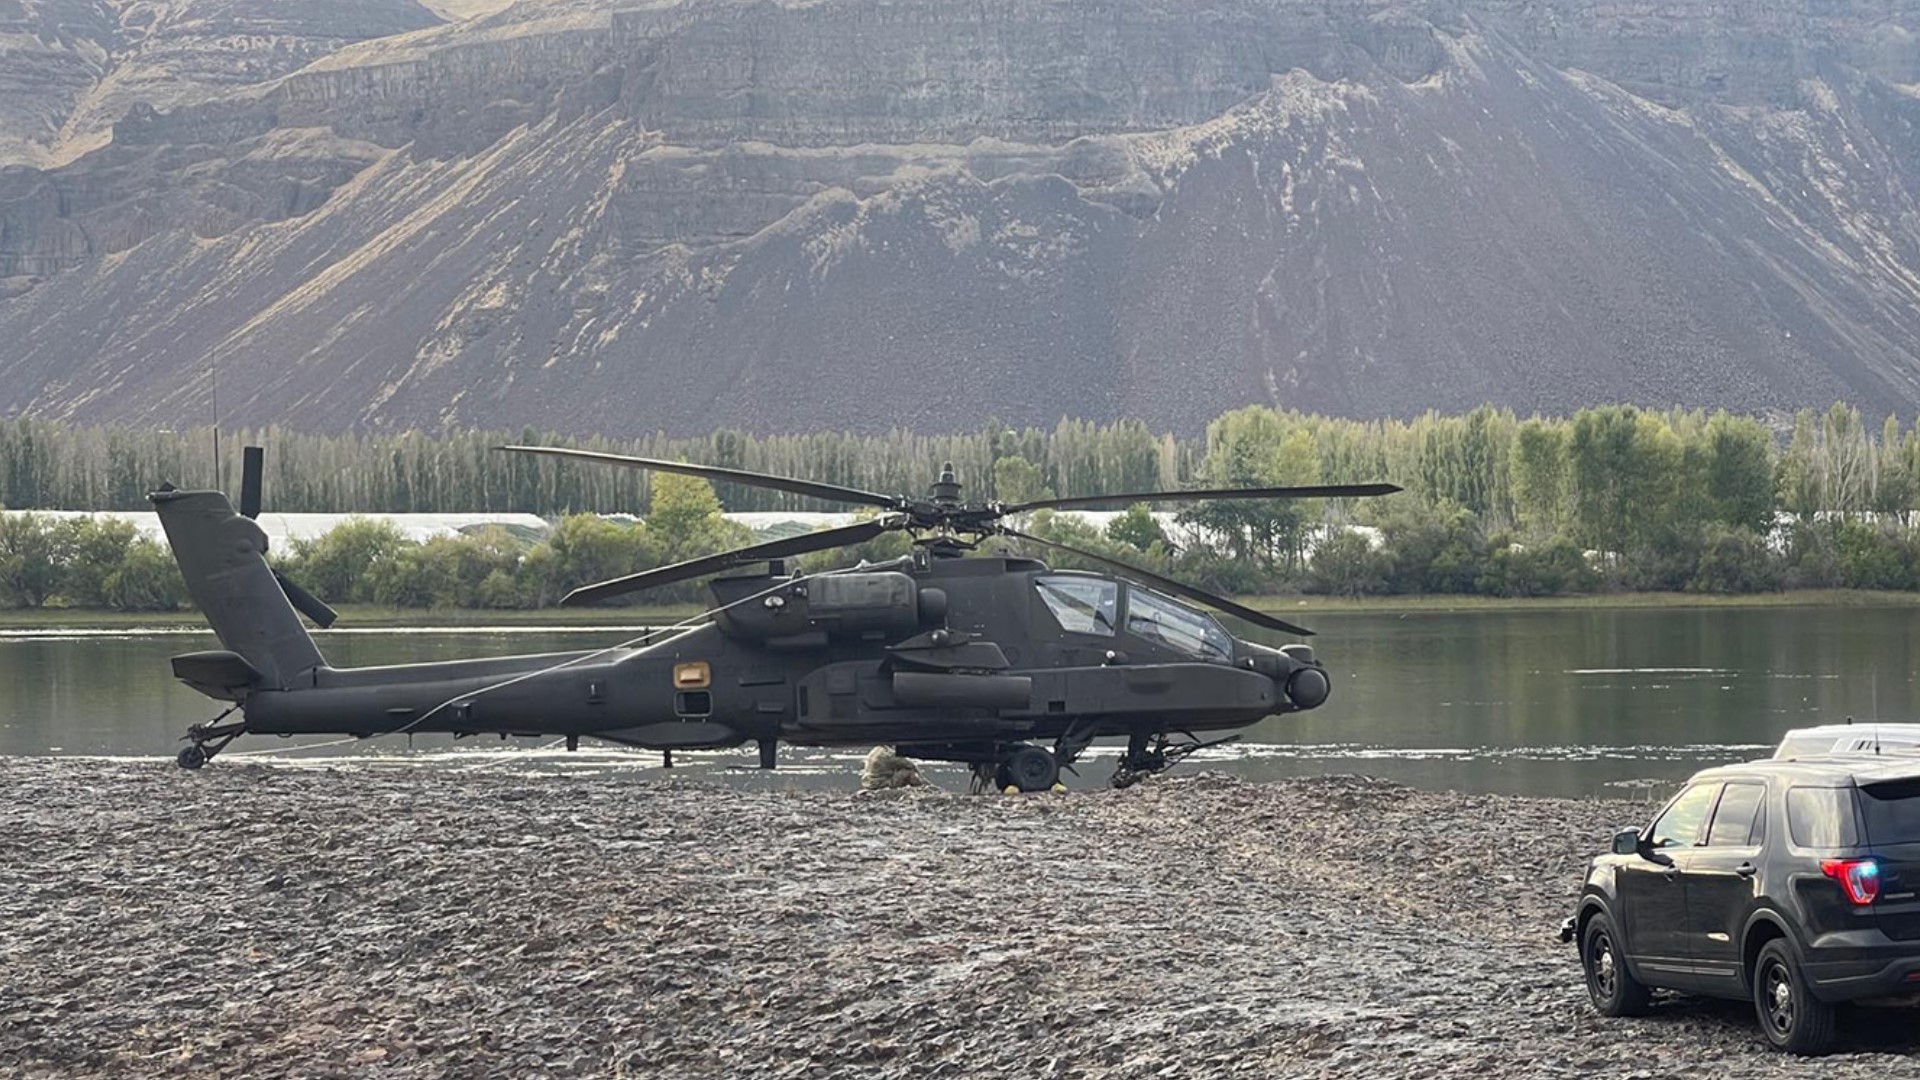 A military helicopter made a "hard landing" after striking power lines over Columbia River near Beverly in Grant County on Friday afternoon.